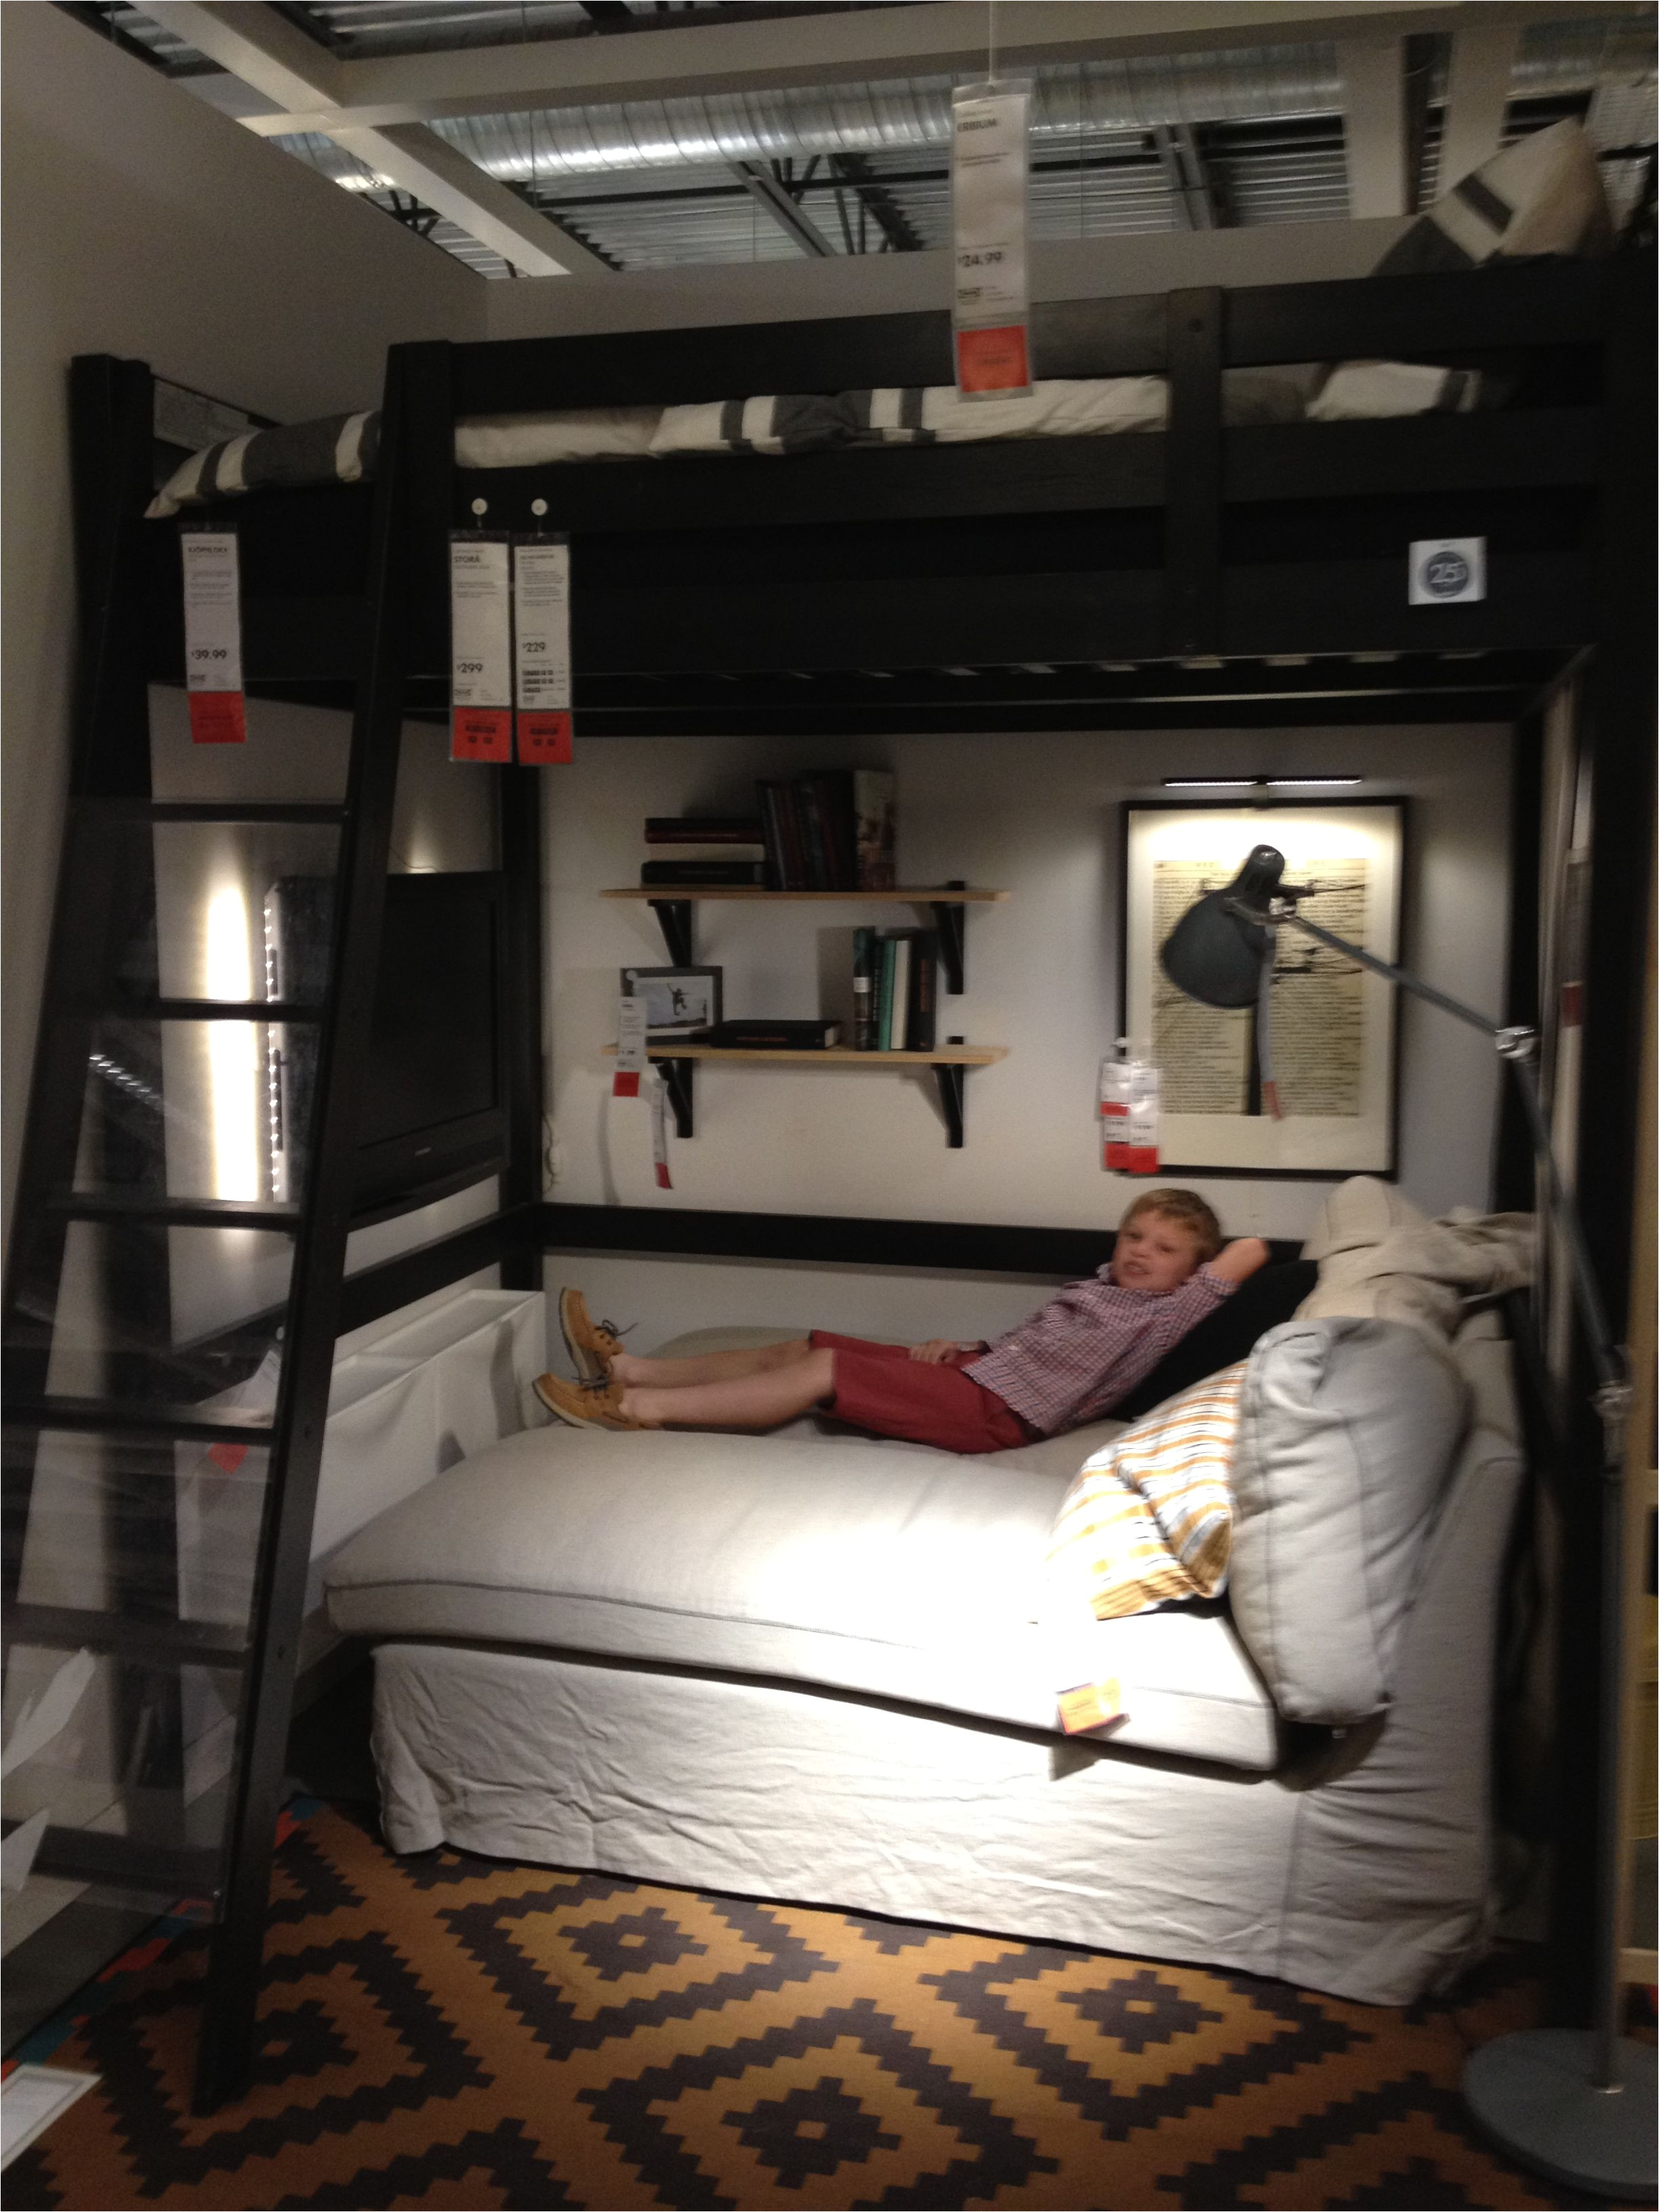 ikea bedroom loft bed with chaise underneath tv on the wall